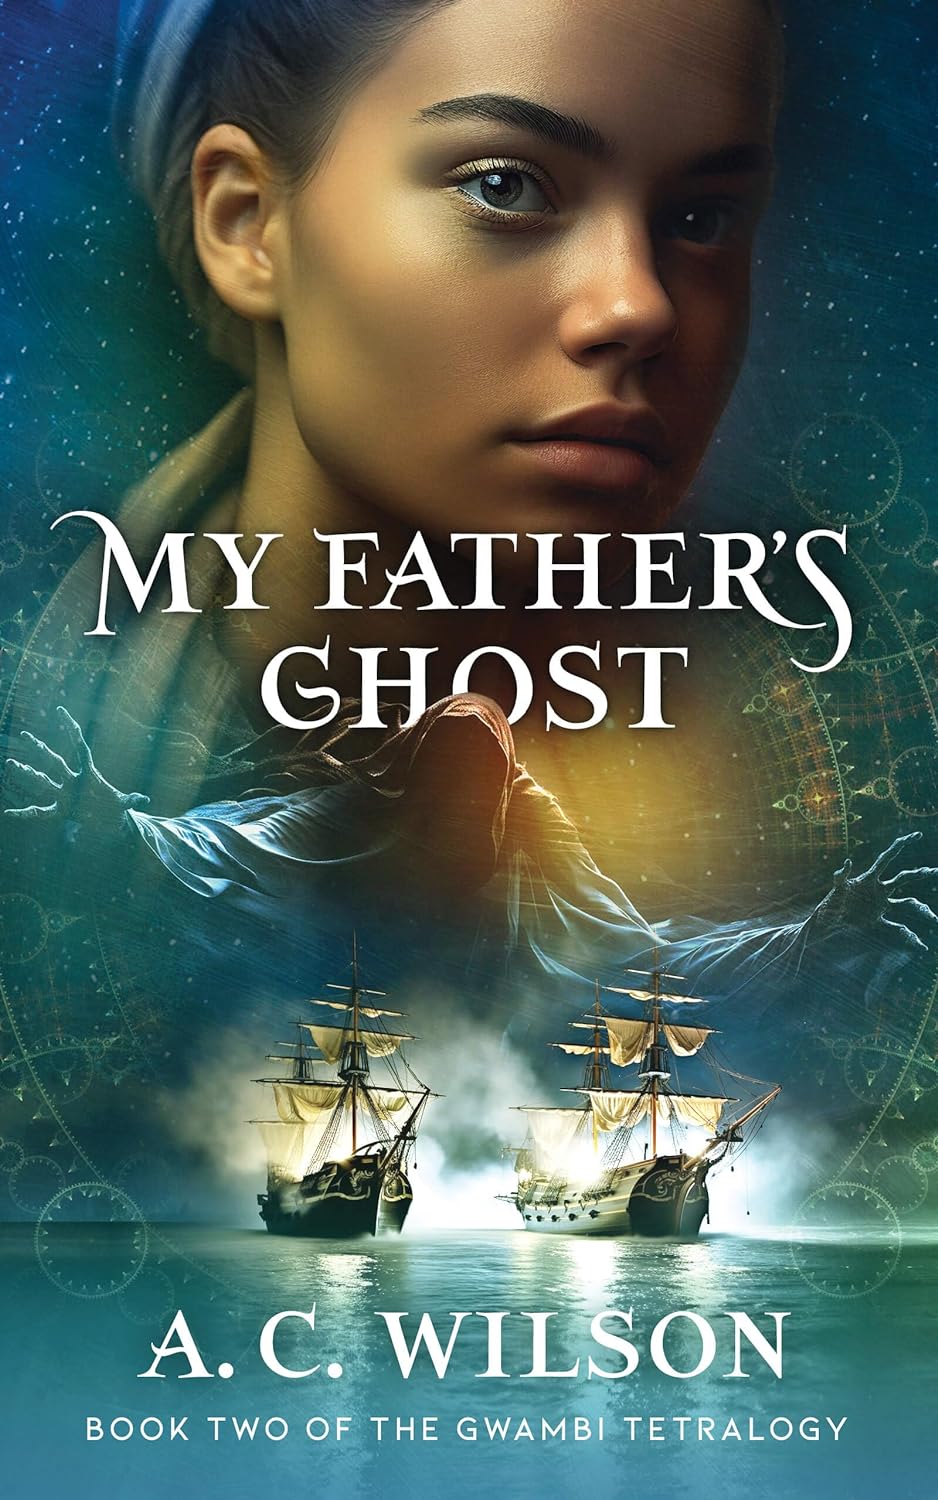 My Father’s Ghost